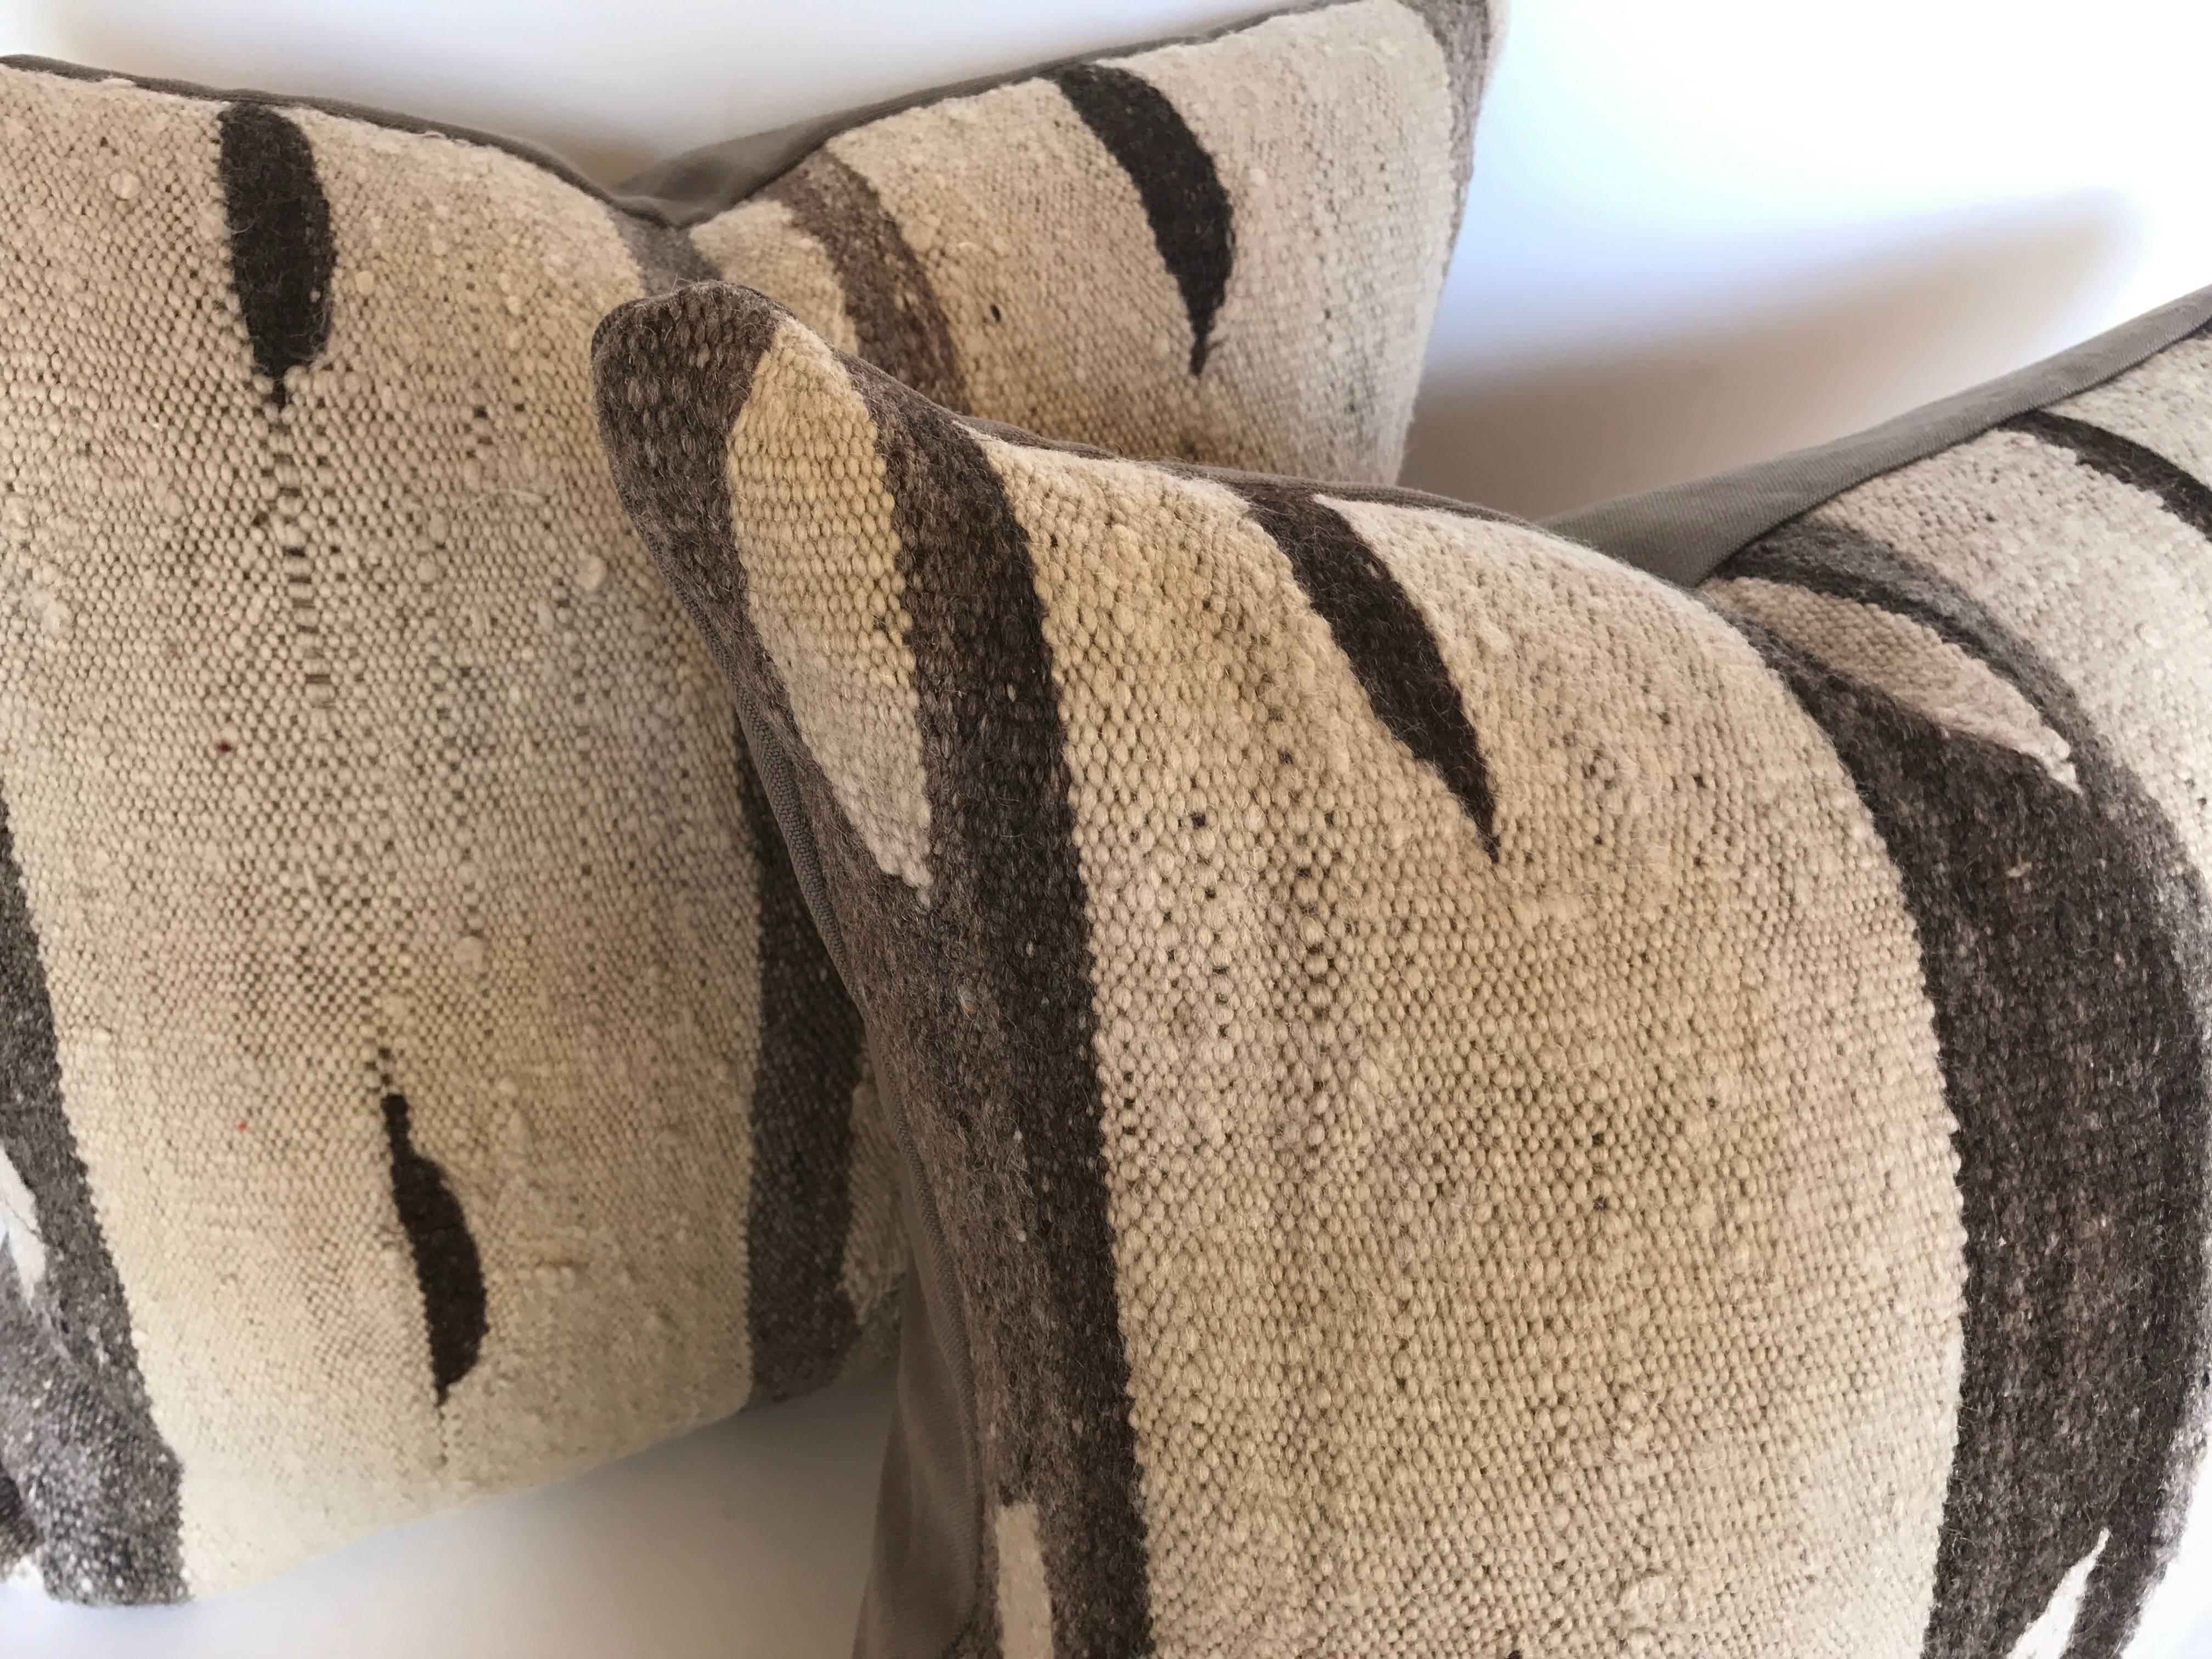 Hand-Woven Custom Moroccan Pillows Cut from a Wool Vintage Ourika Kilim, Atlas Mountains